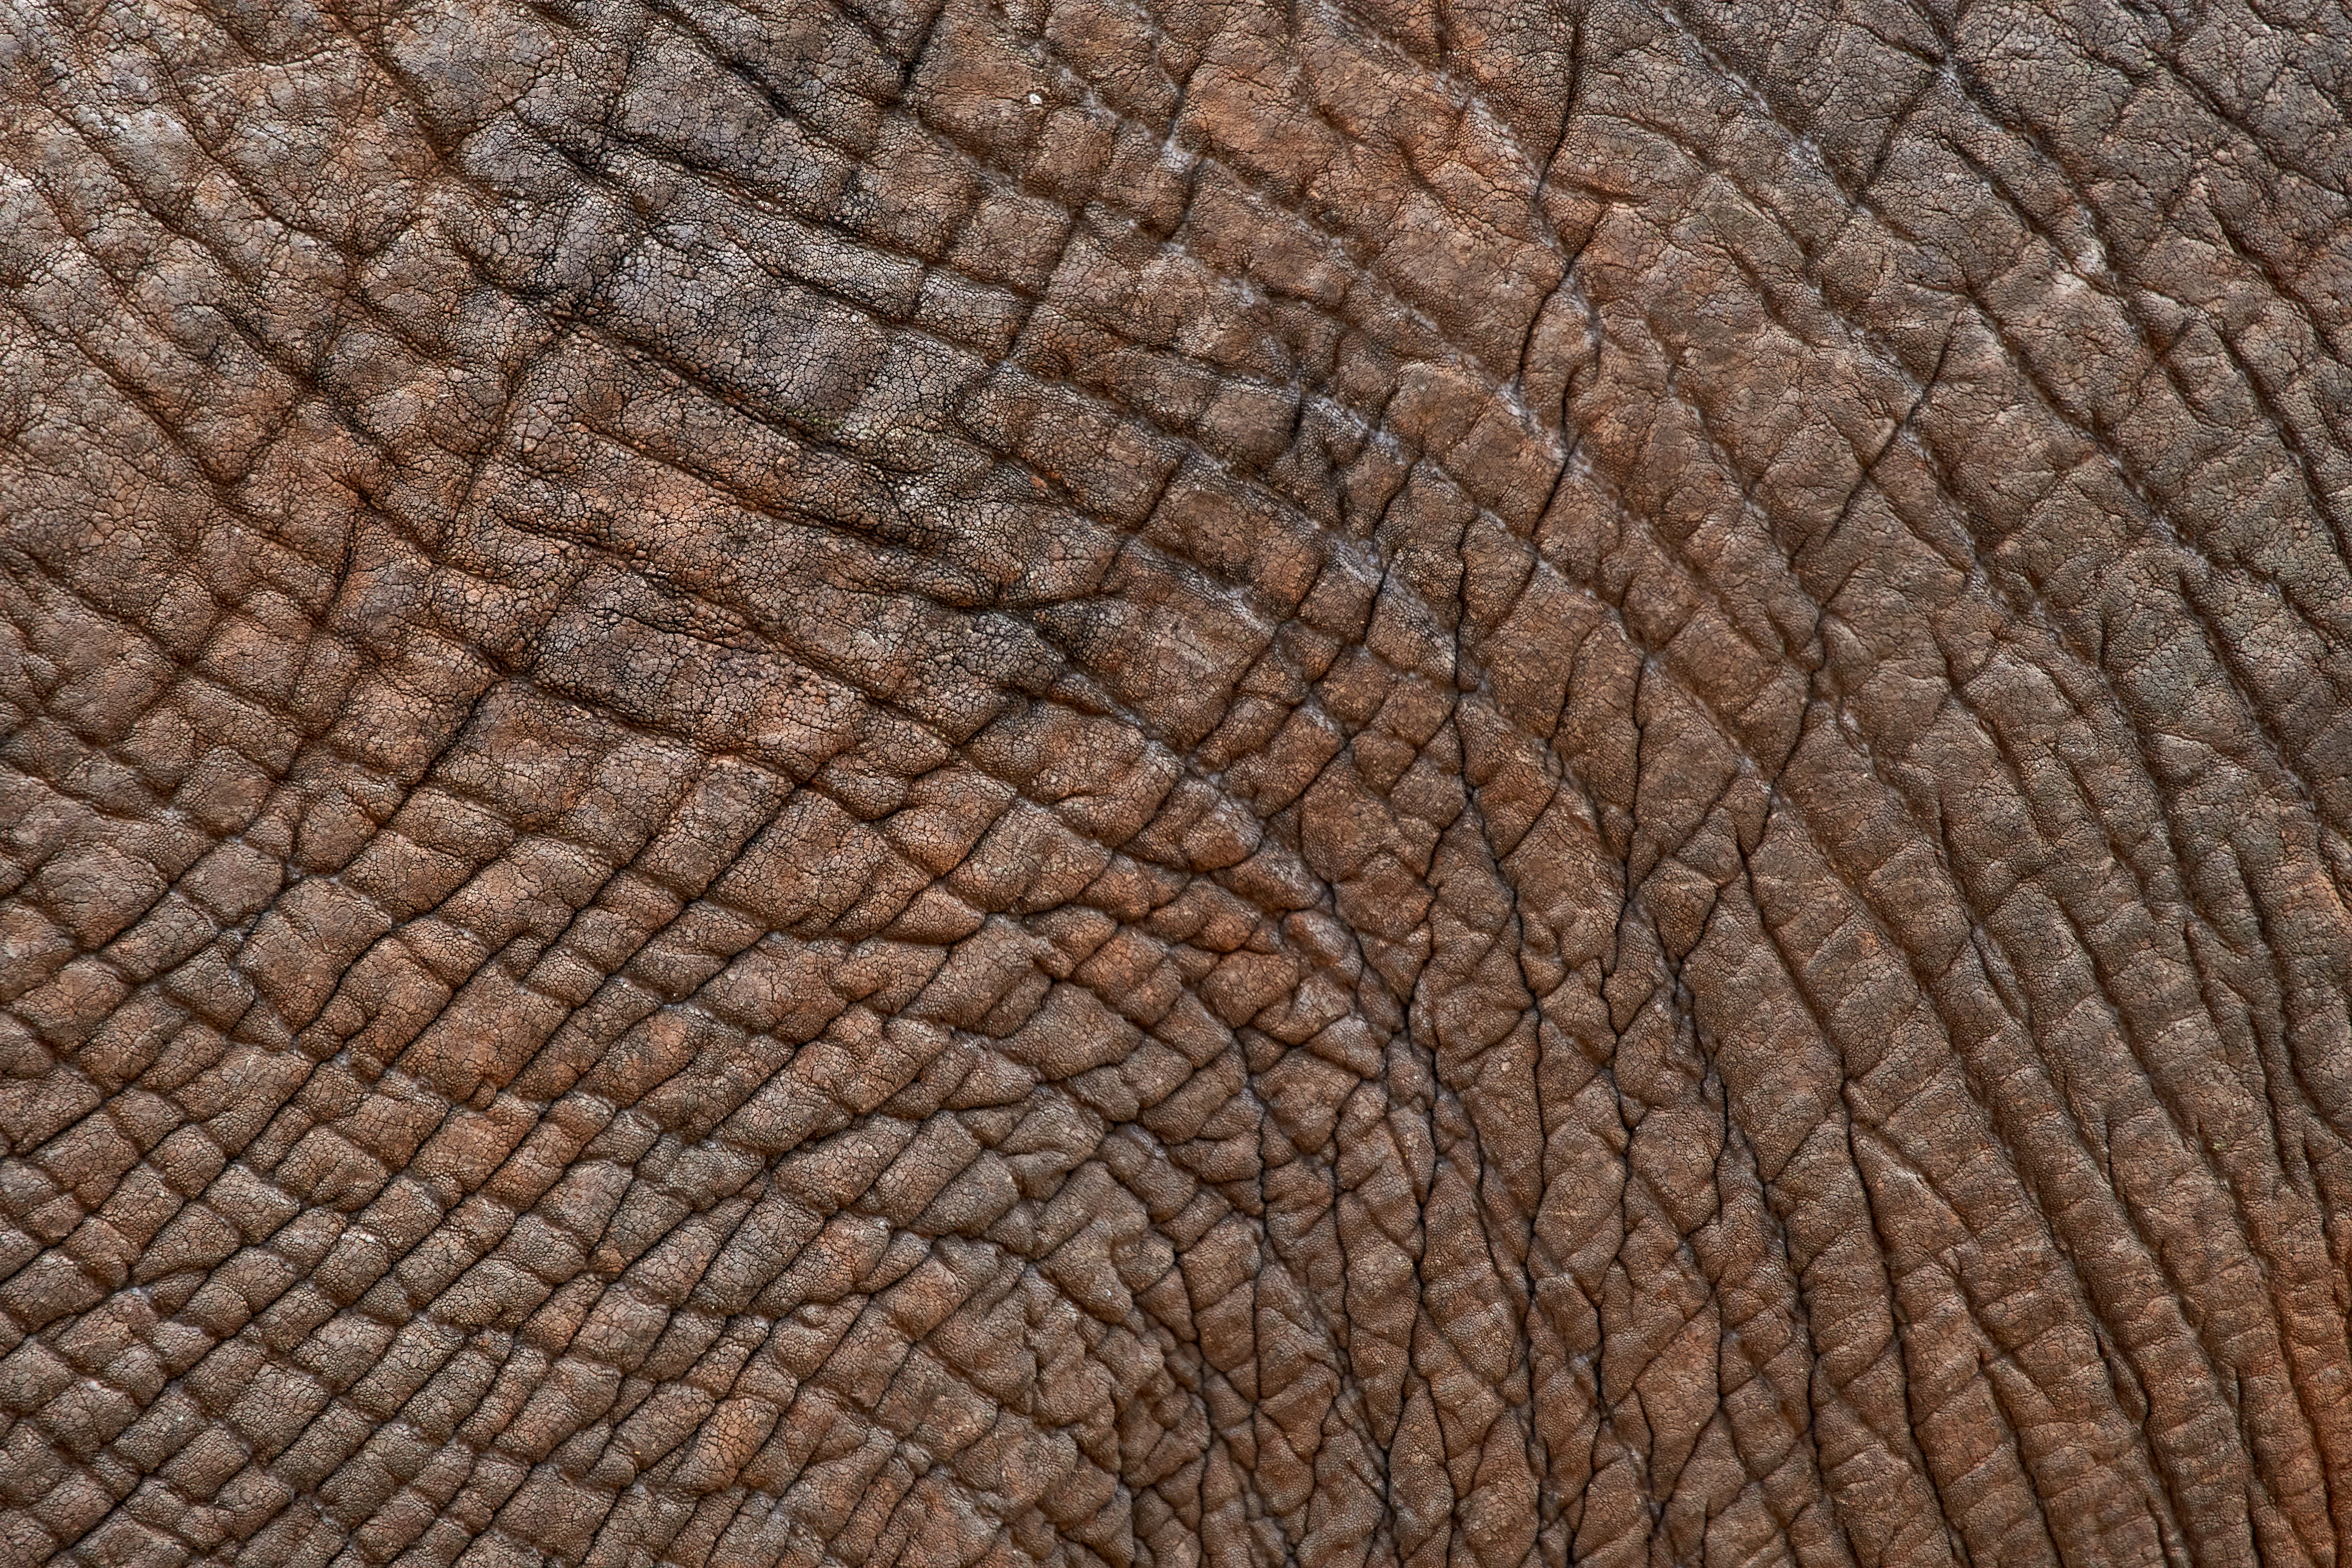 folds, skin, texture, textures, surface, pleating, leather, wrinkles